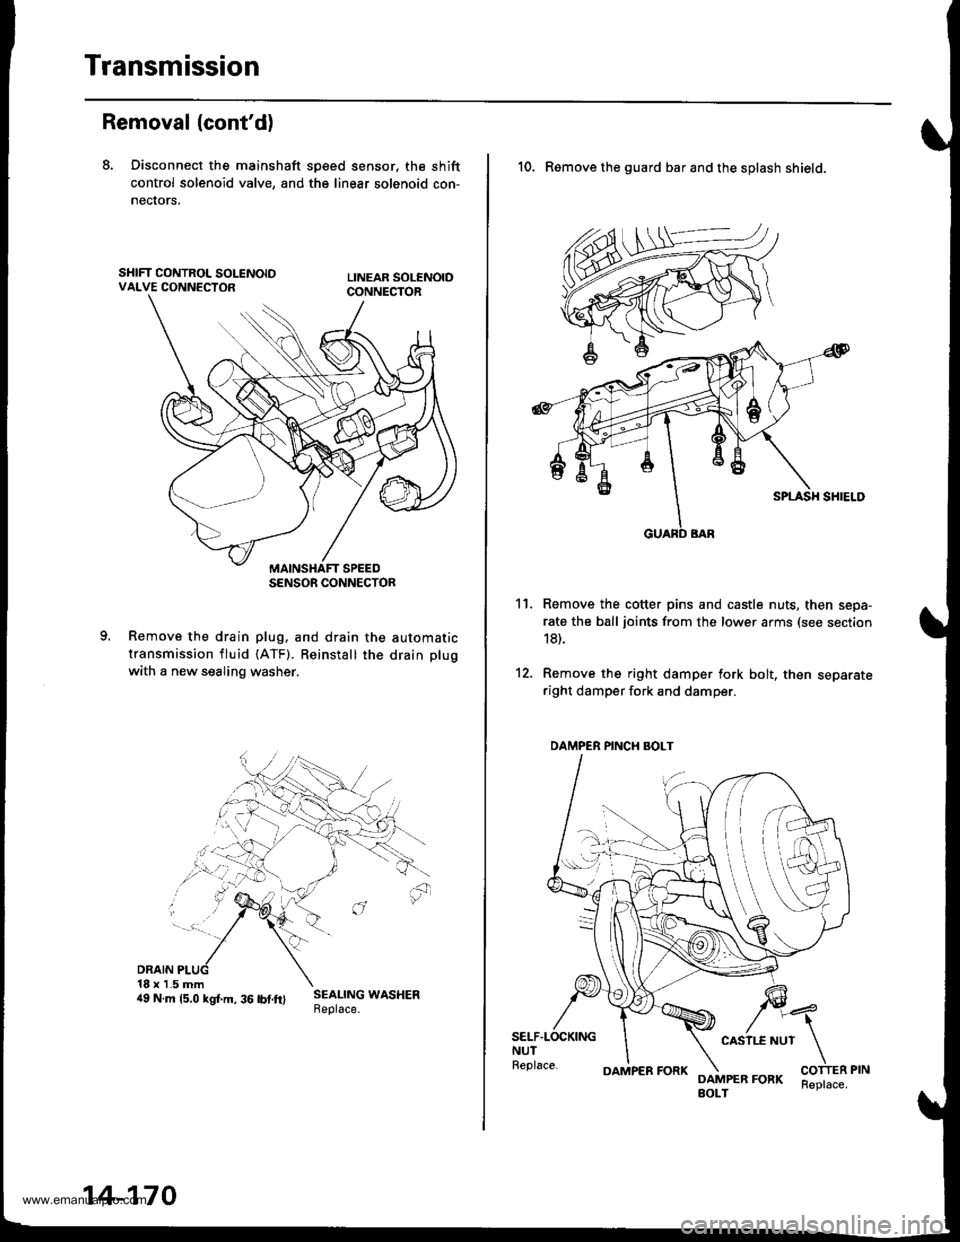 HONDA CR-V 1998 RD1-RD3 / 1.G Workshop Manual 
Transmission
Removal (contd)
8. Disconnect the mainshaft sp€ed sensor, the shift
control solenoid valve, and the linear solenoid con-
necrors,
Remove the drain plug. and drain the automatic
transm